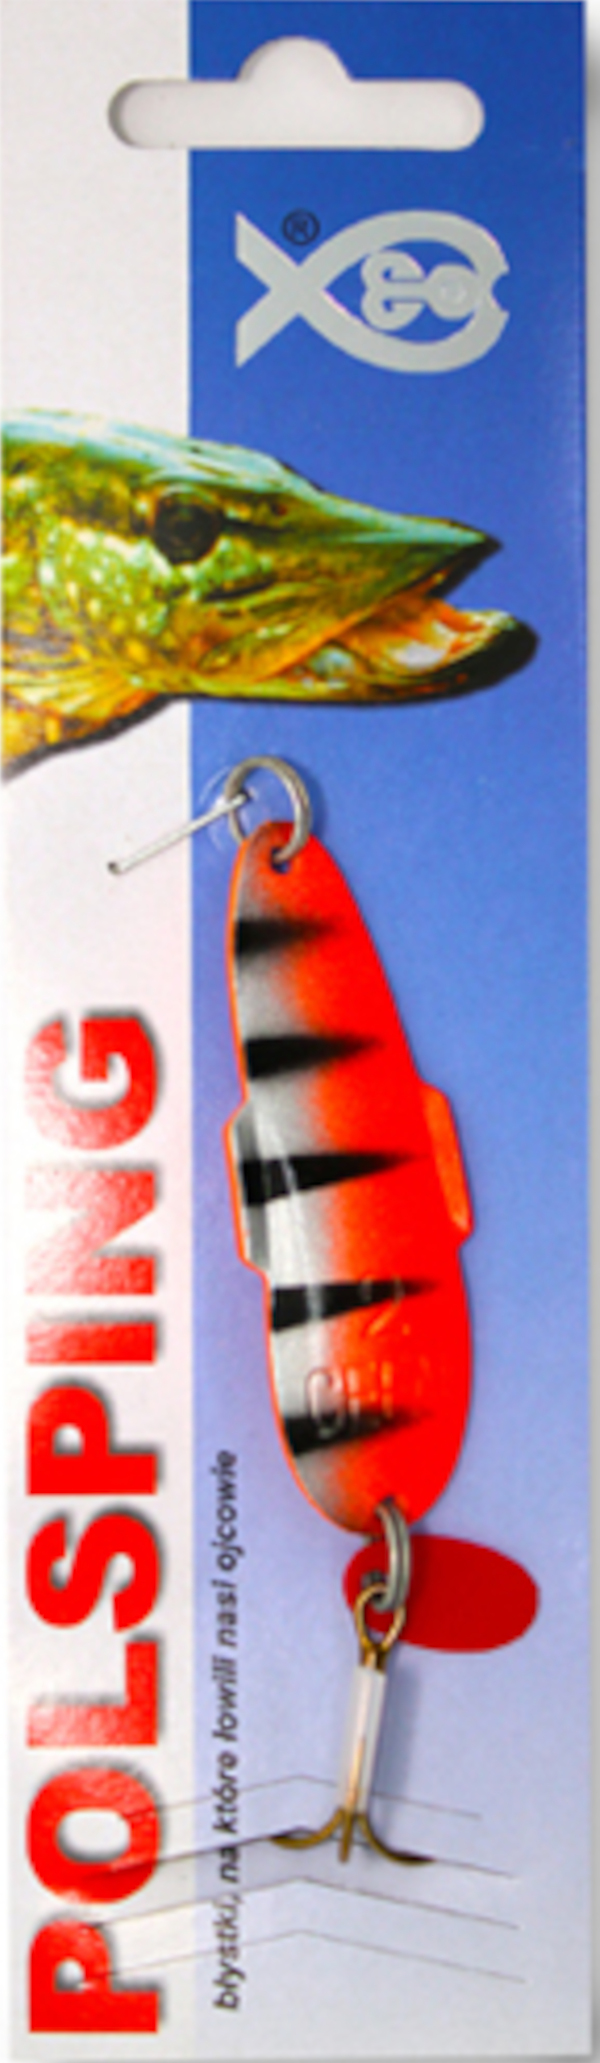 Cucchiaino Polsping Cefal - Fluo Silver Red Tiger